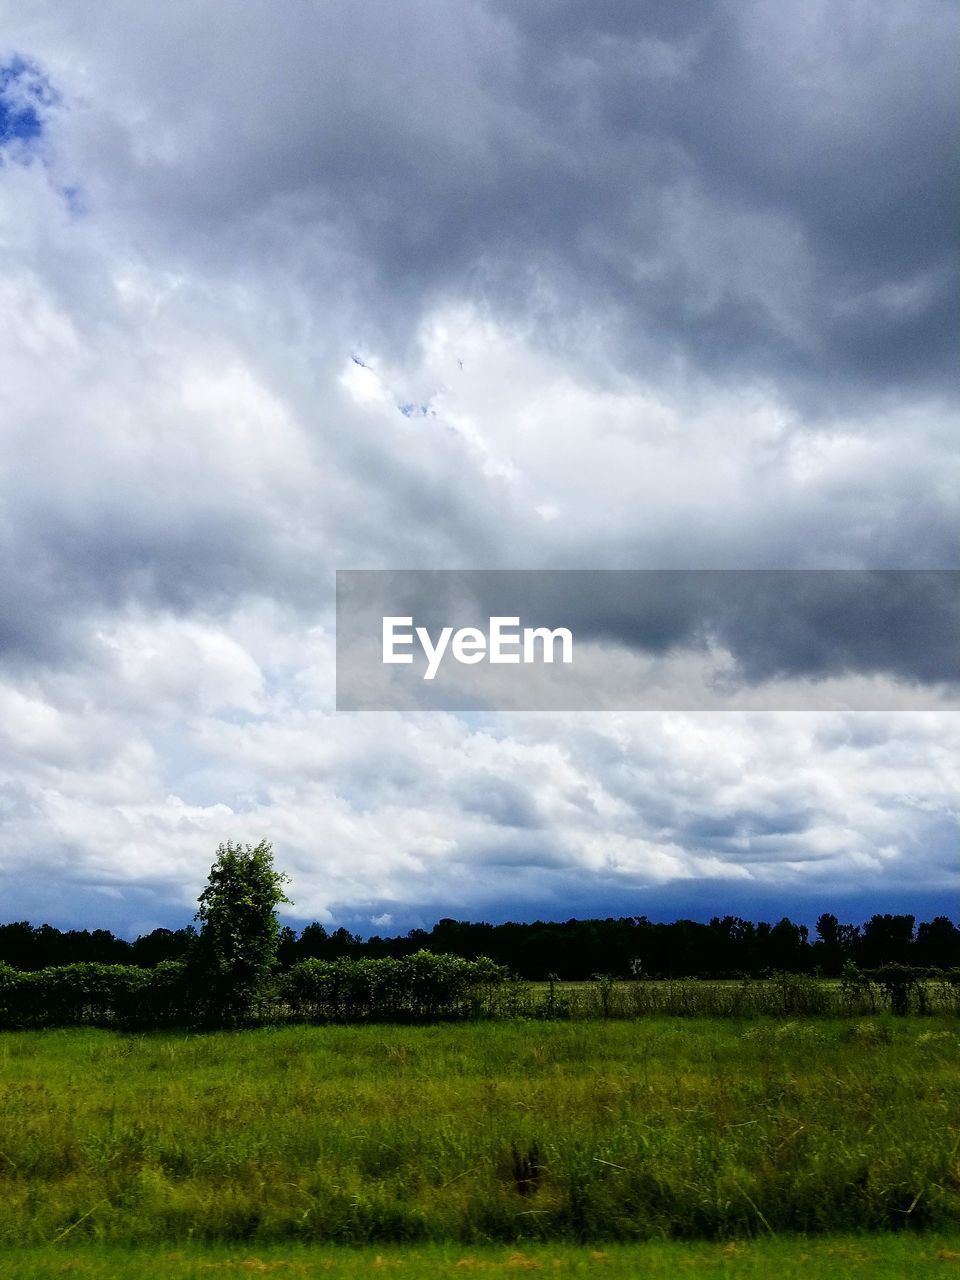 SCENIC VIEW OF GRASSY FIELD AGAINST CLOUDY SKY